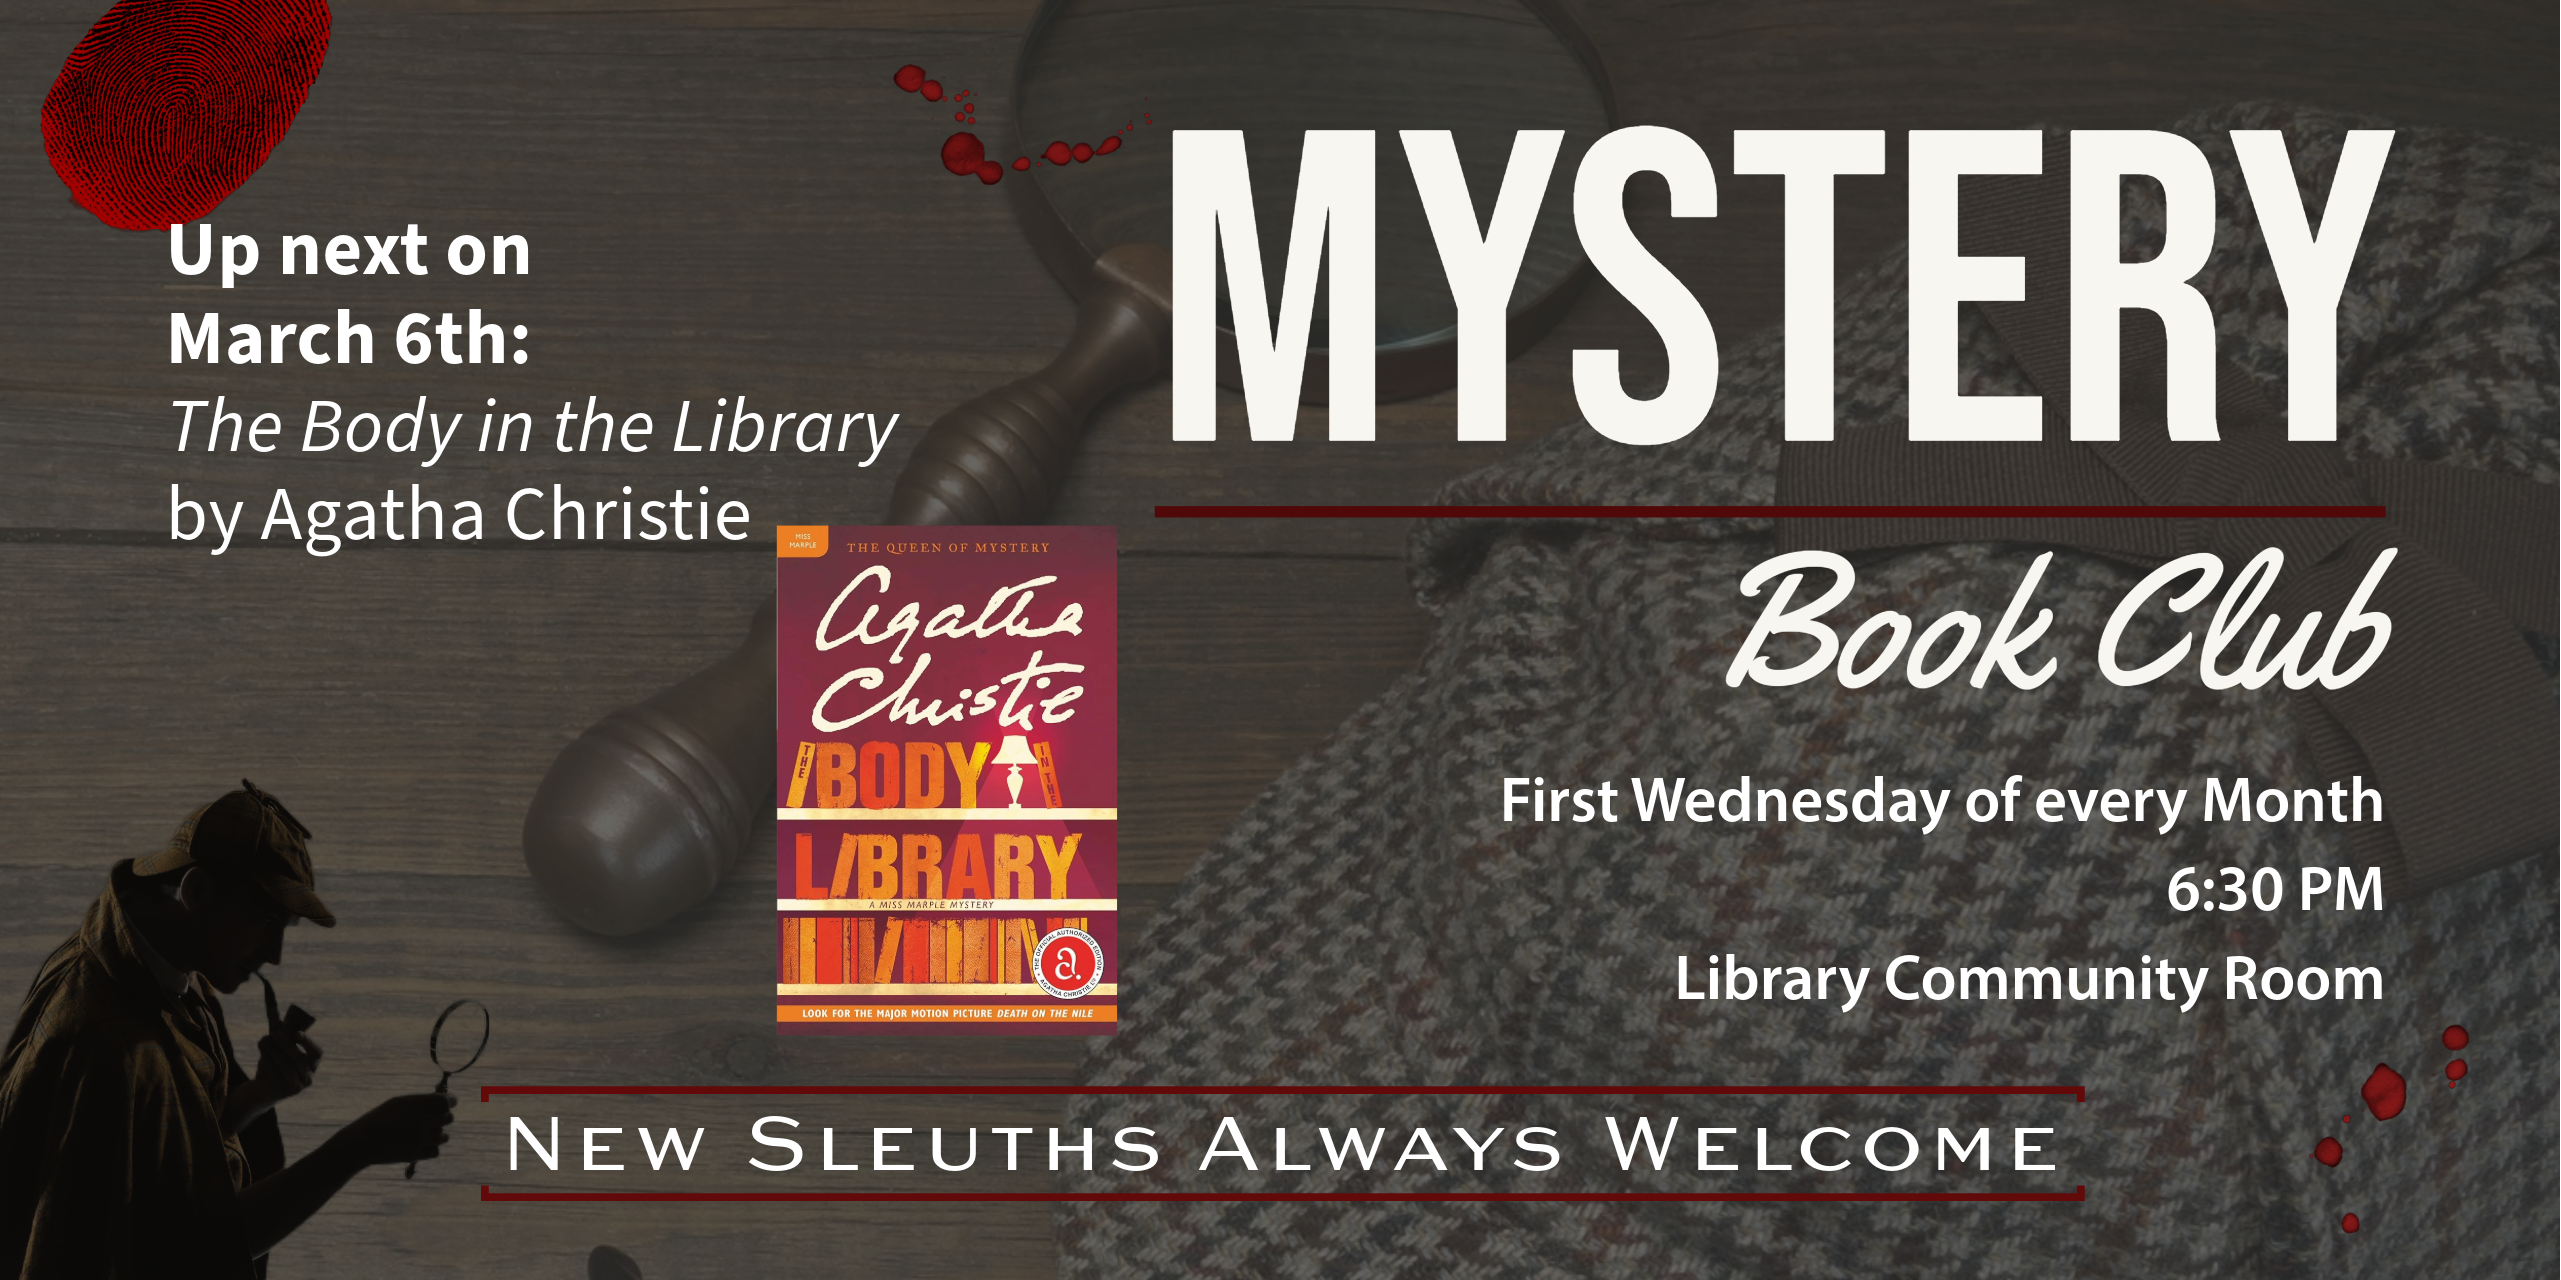 Mystery Book Club meets the first Wednesday of every month at 6:30 in the Library Community Room.  Up next is March 6, where we'll discuss "The Body in the Library" by Agatha Christie.